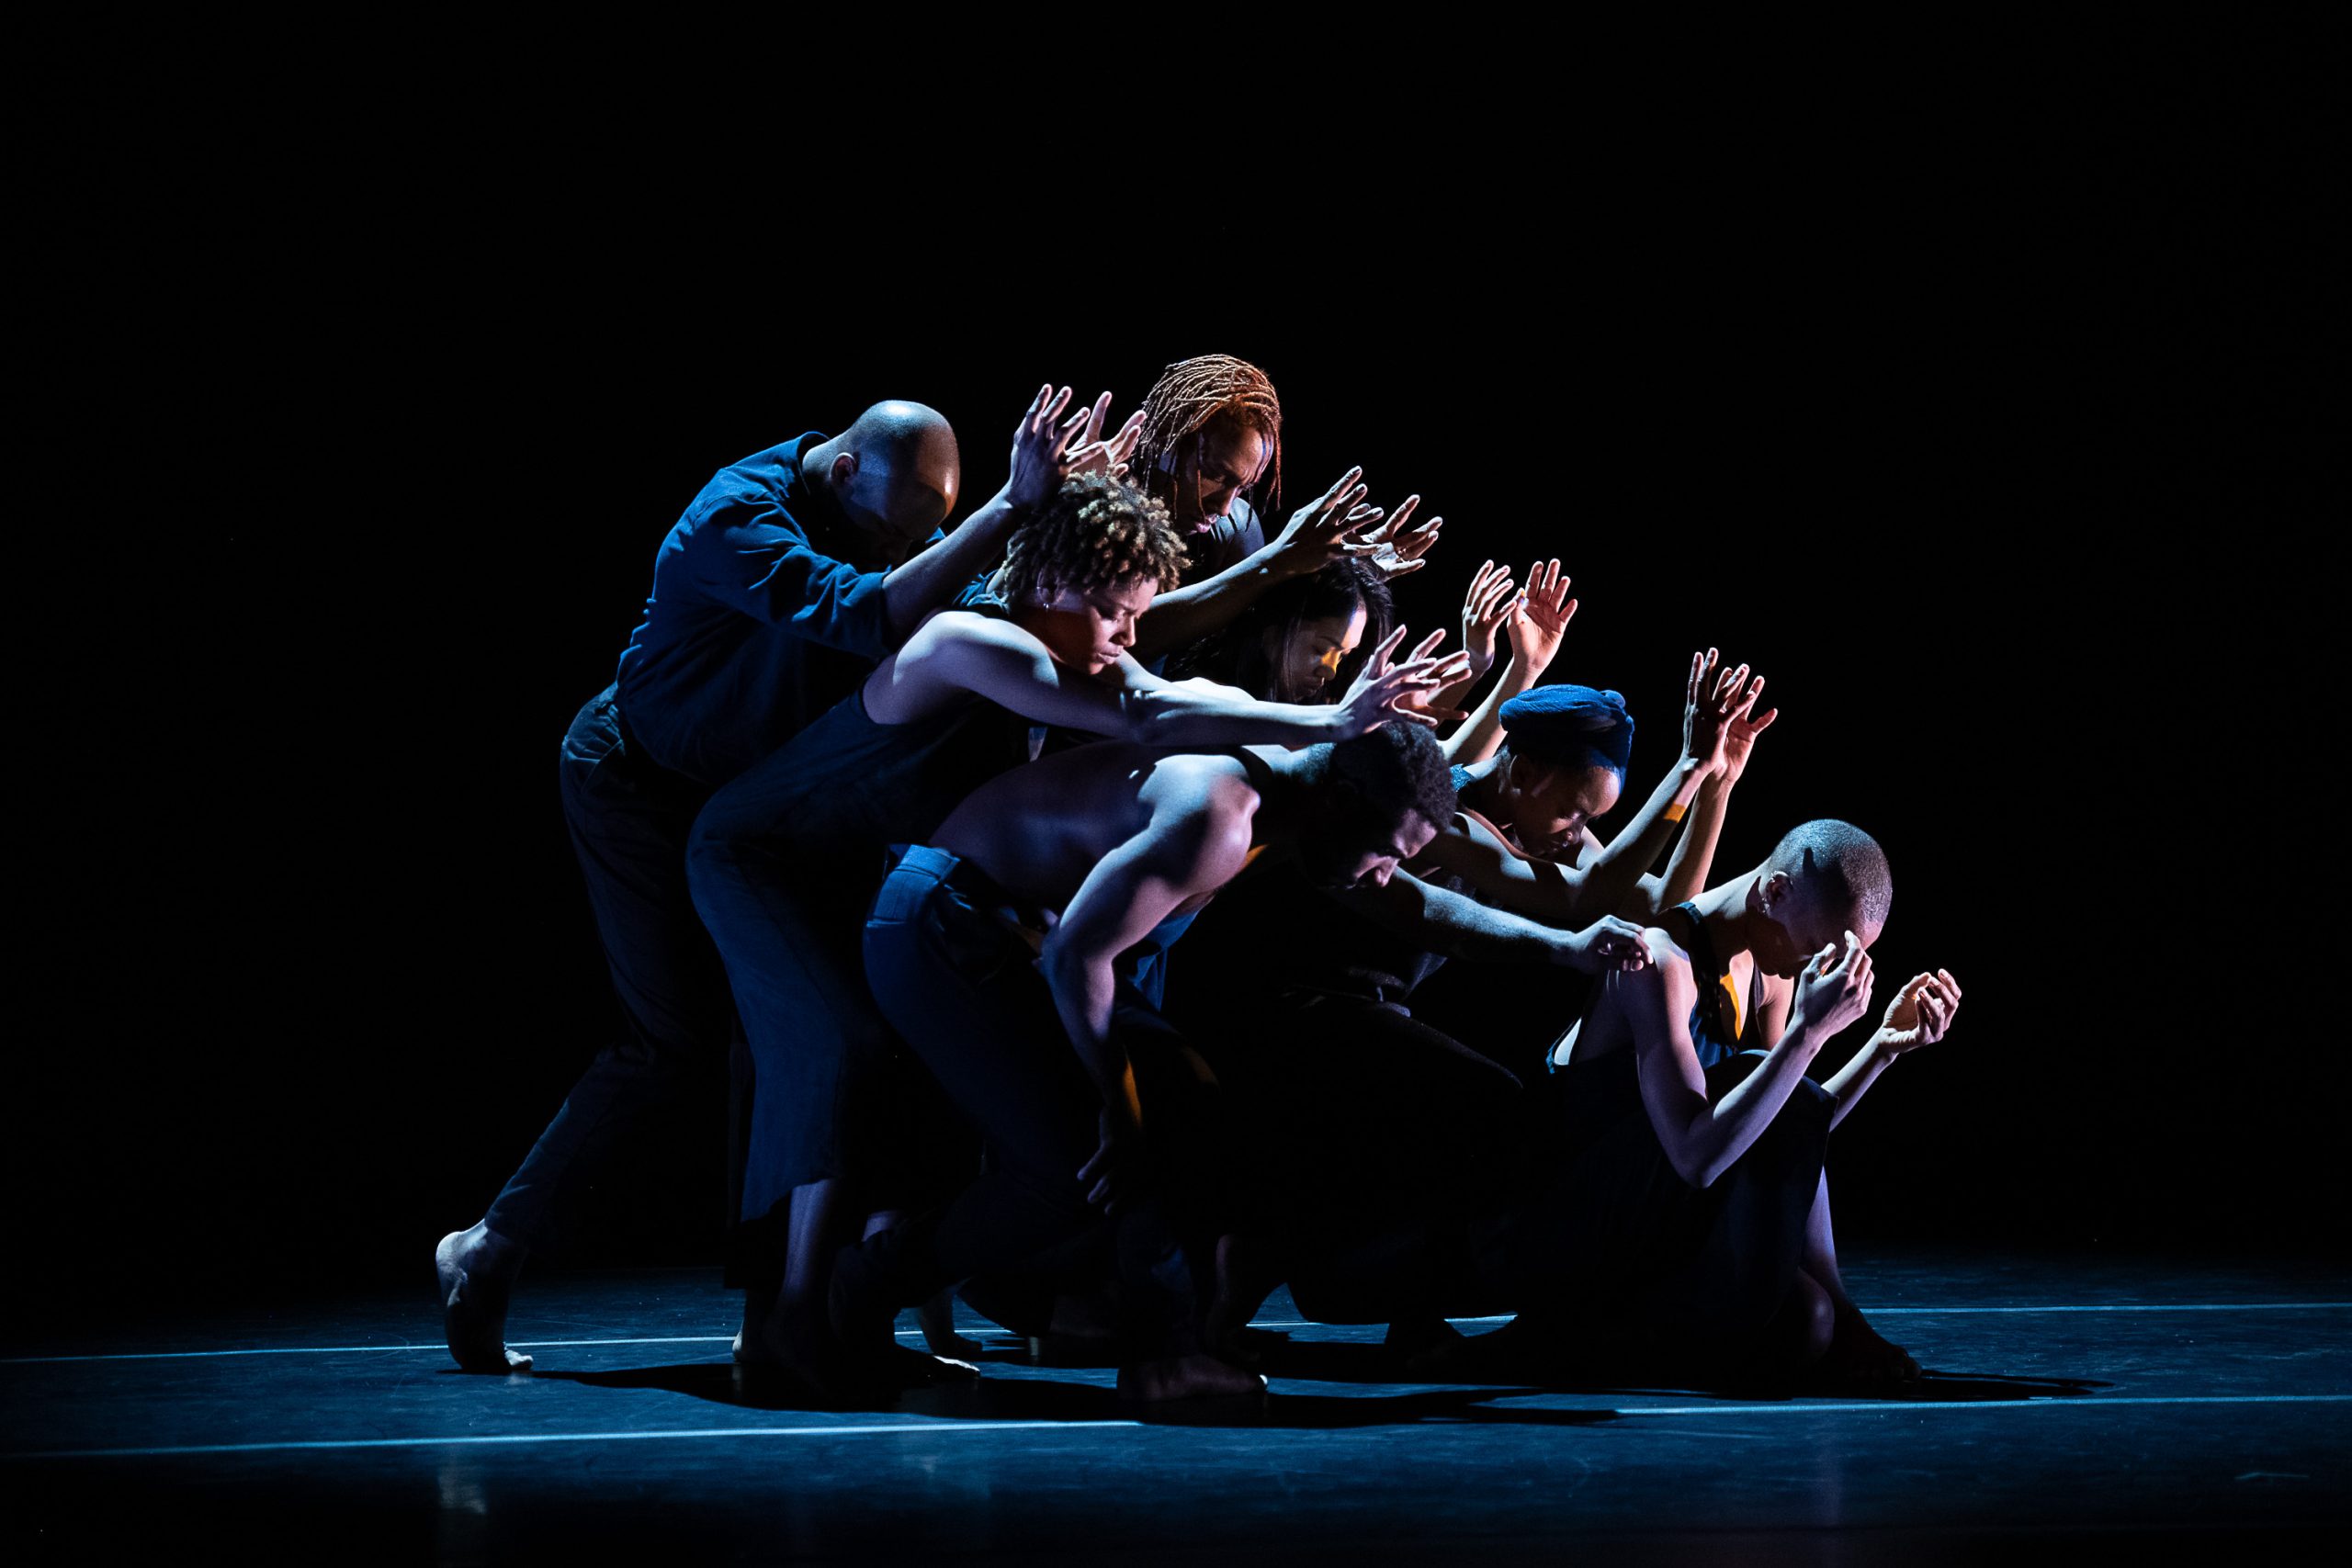 Stage performance of a mass of people grouped together behind one person, lit in dramatic lighting.